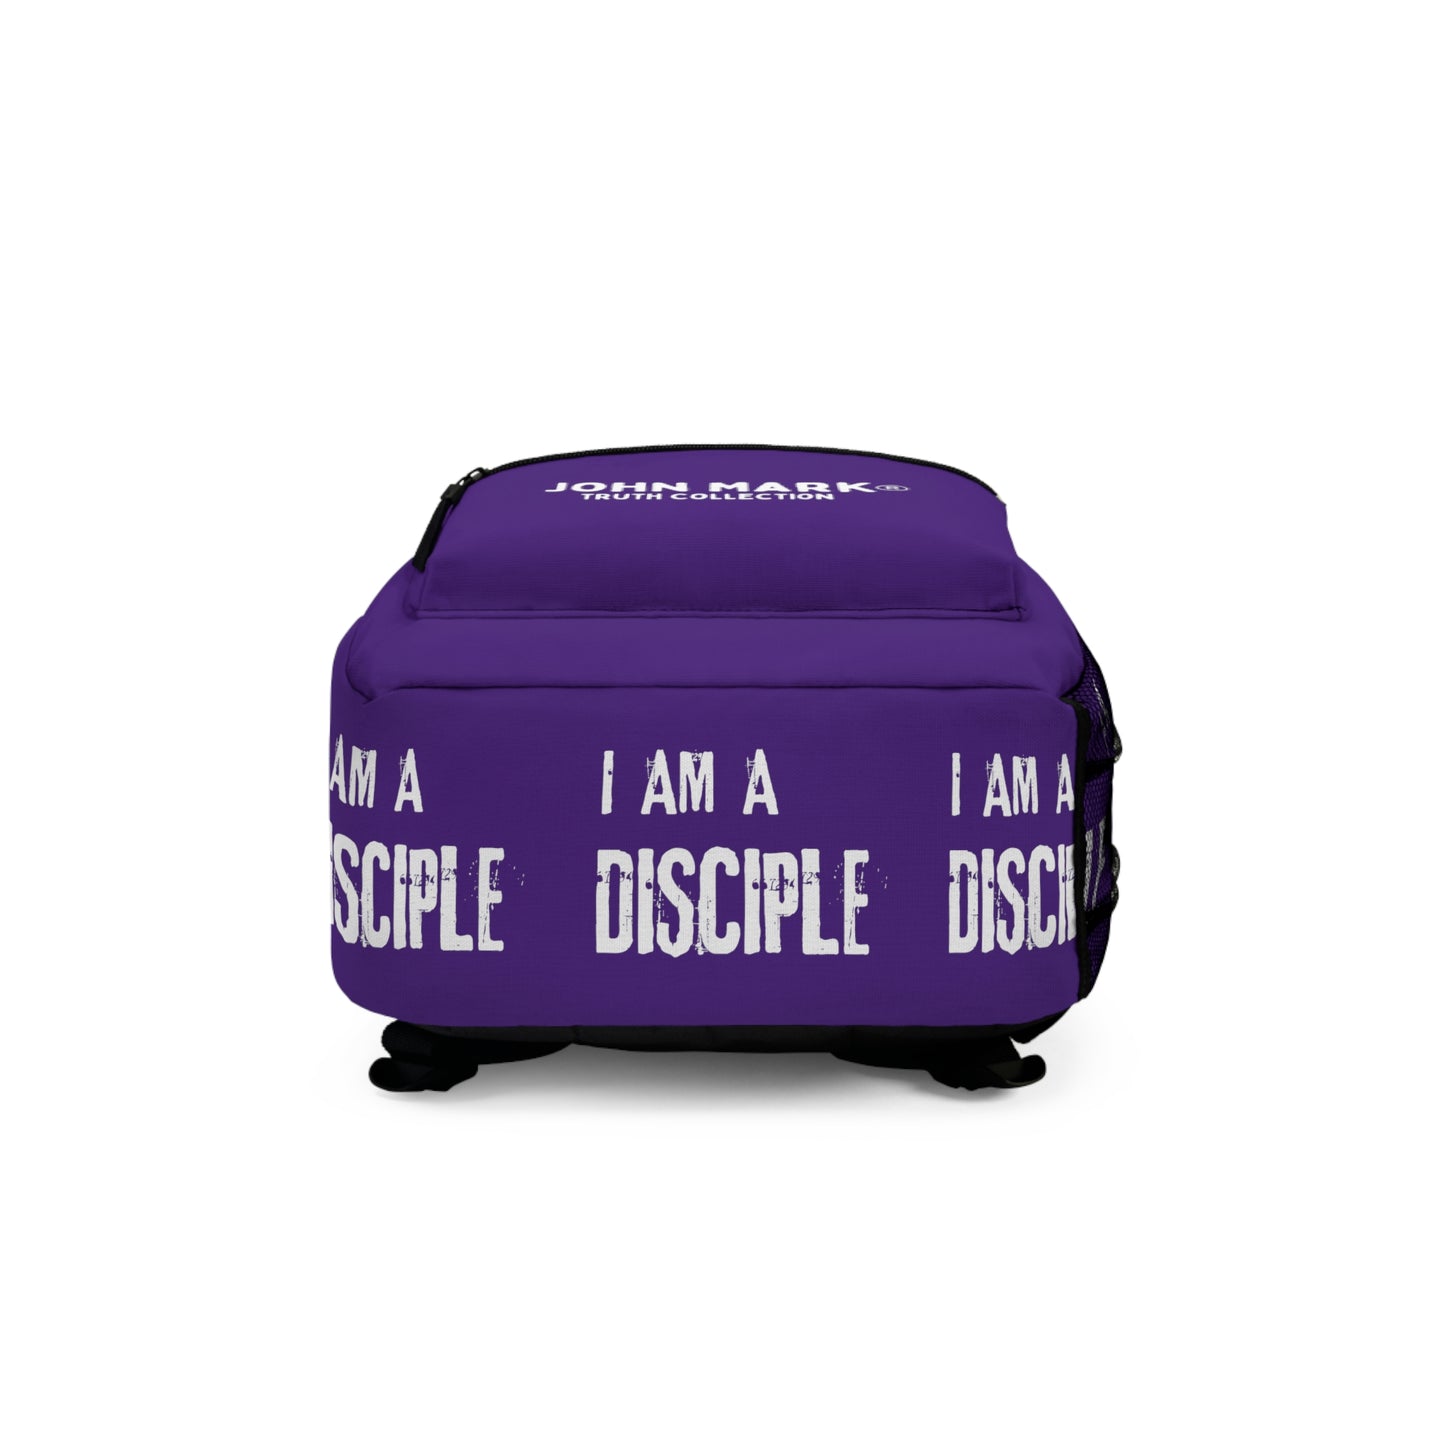 "Disciple" Backpack